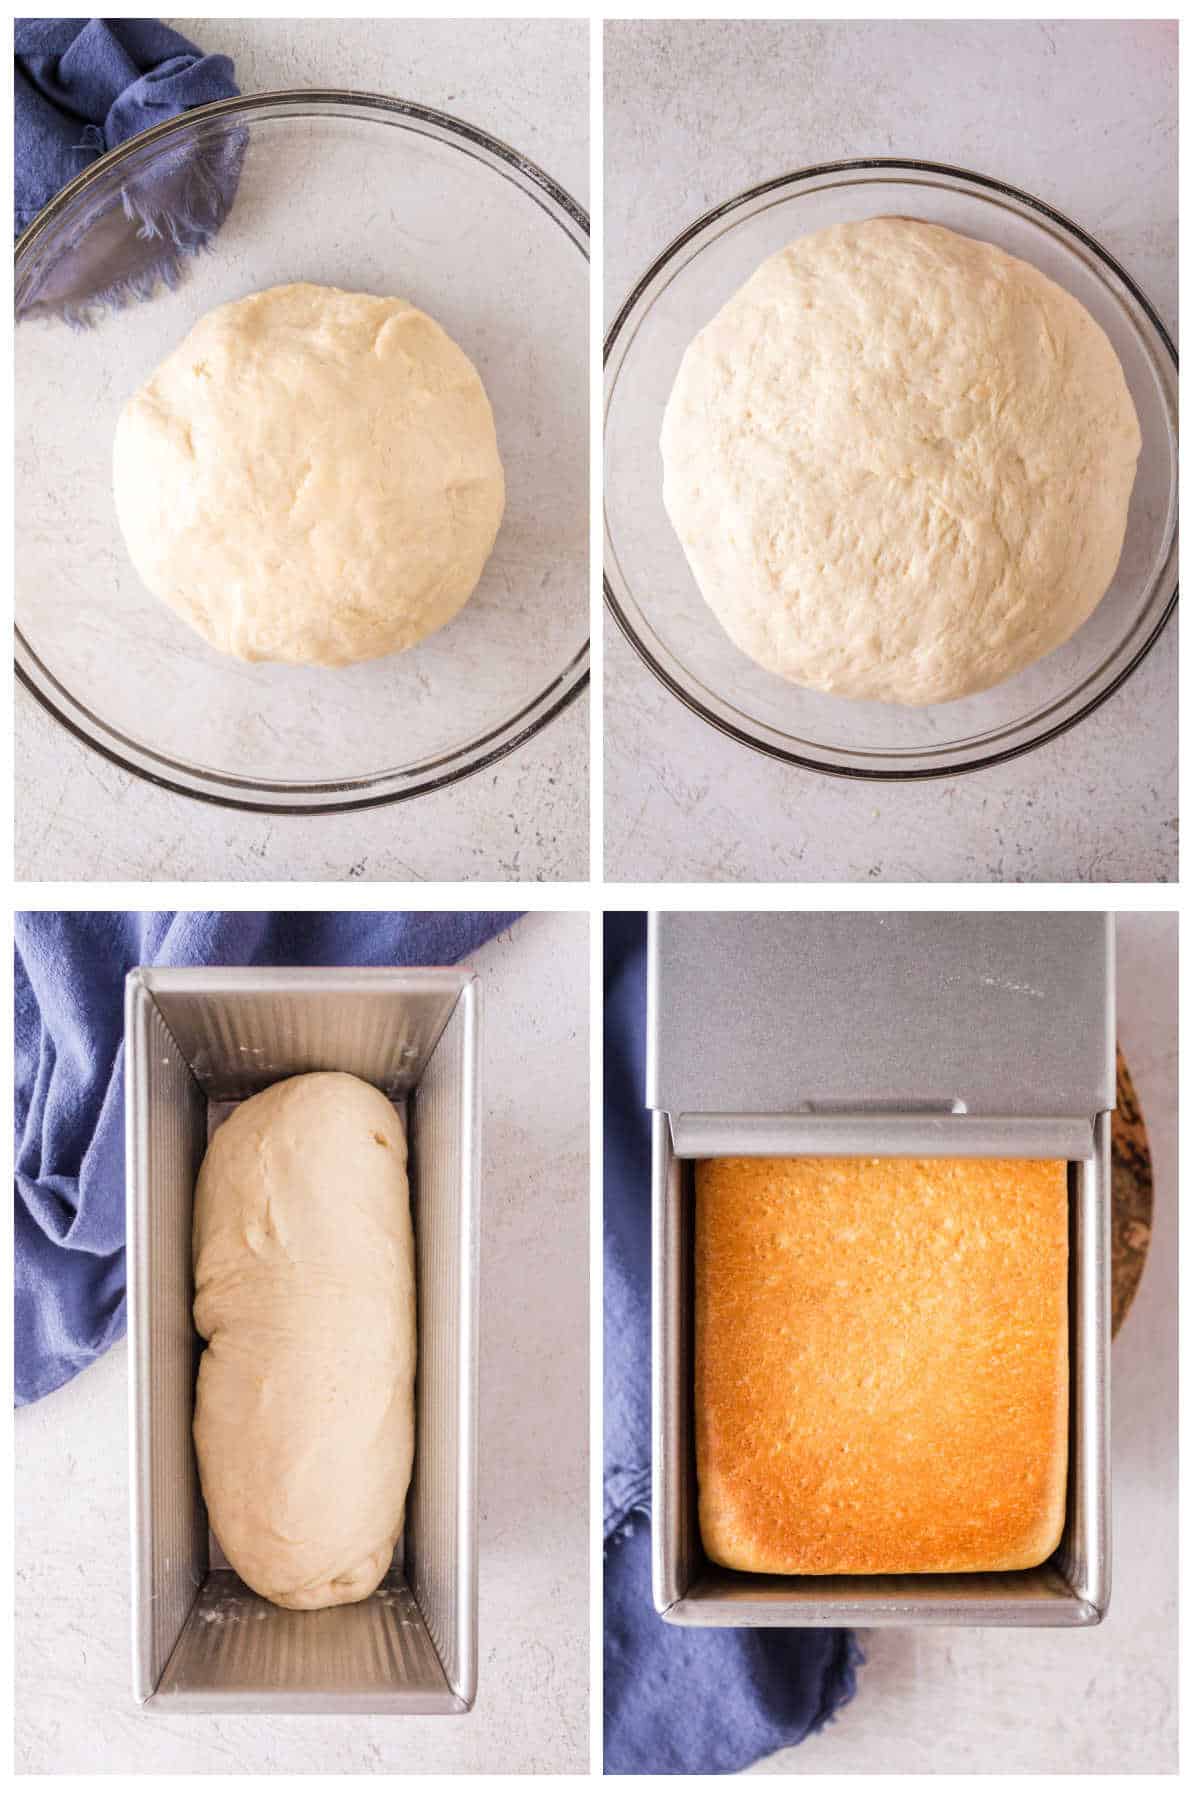 Step by step images showing how to shape the Pullman loaf bread.